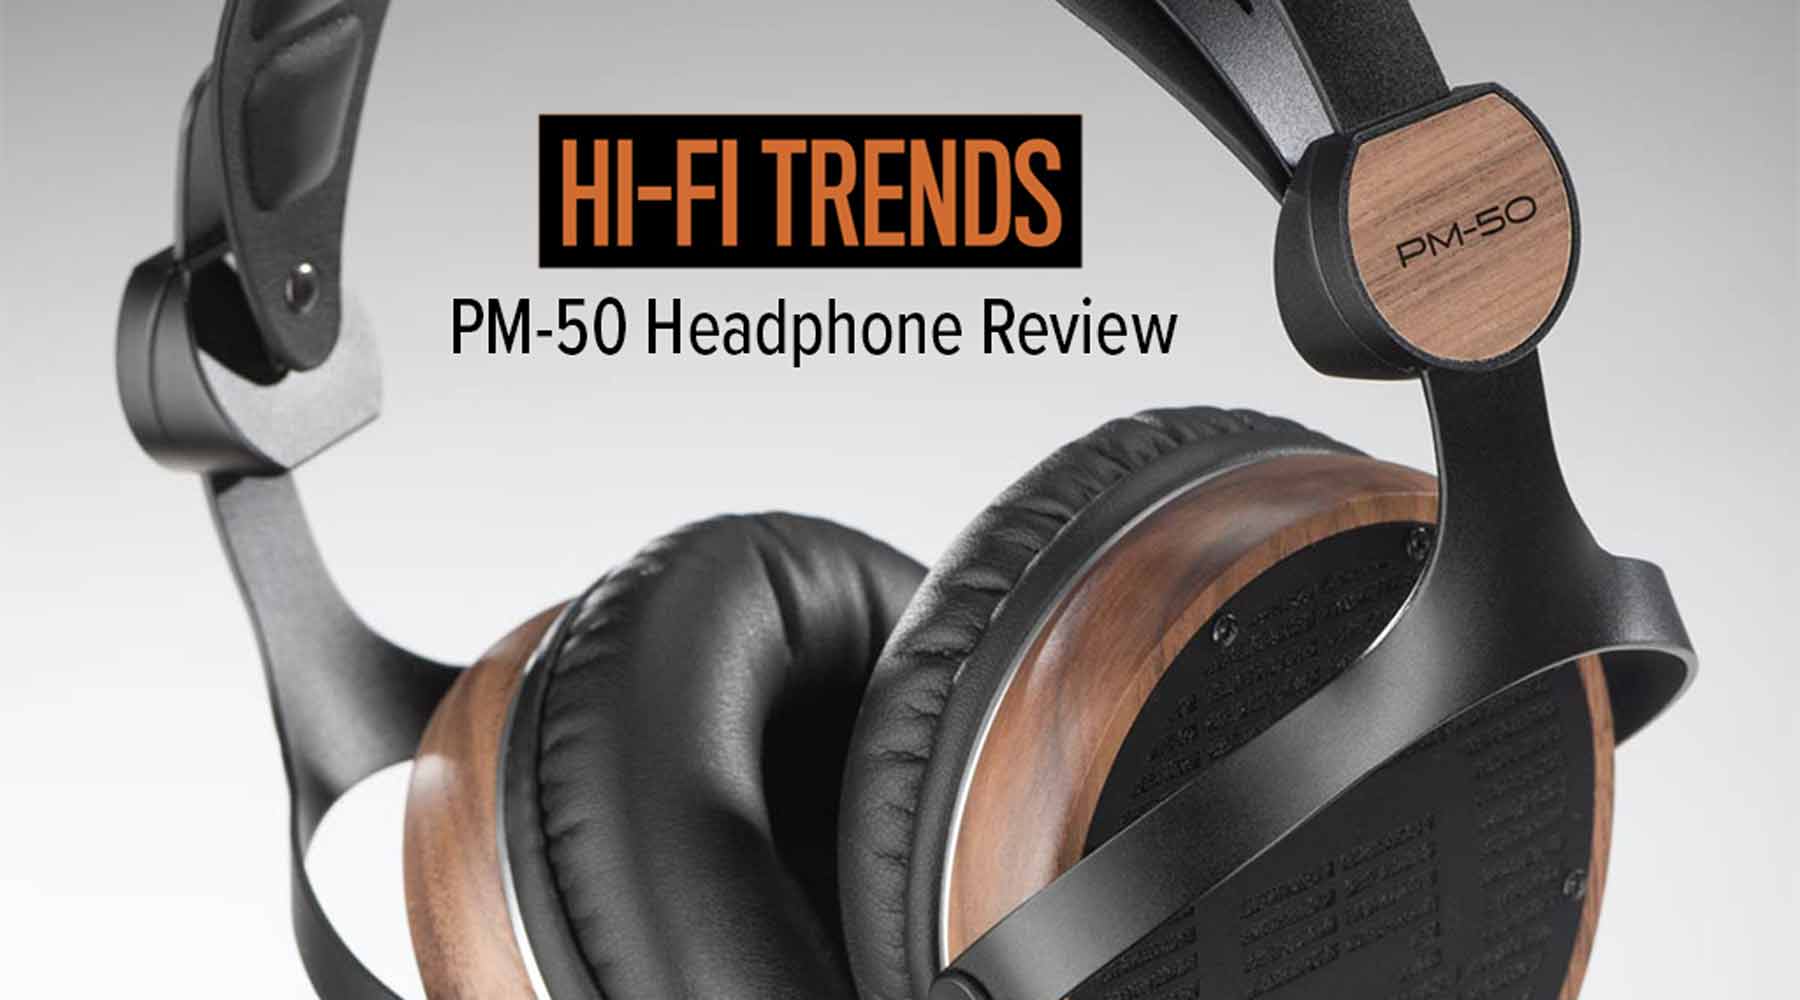 Hi-Fi Trends PM-50 Review: "You Need To Hear These Seductive Planars"